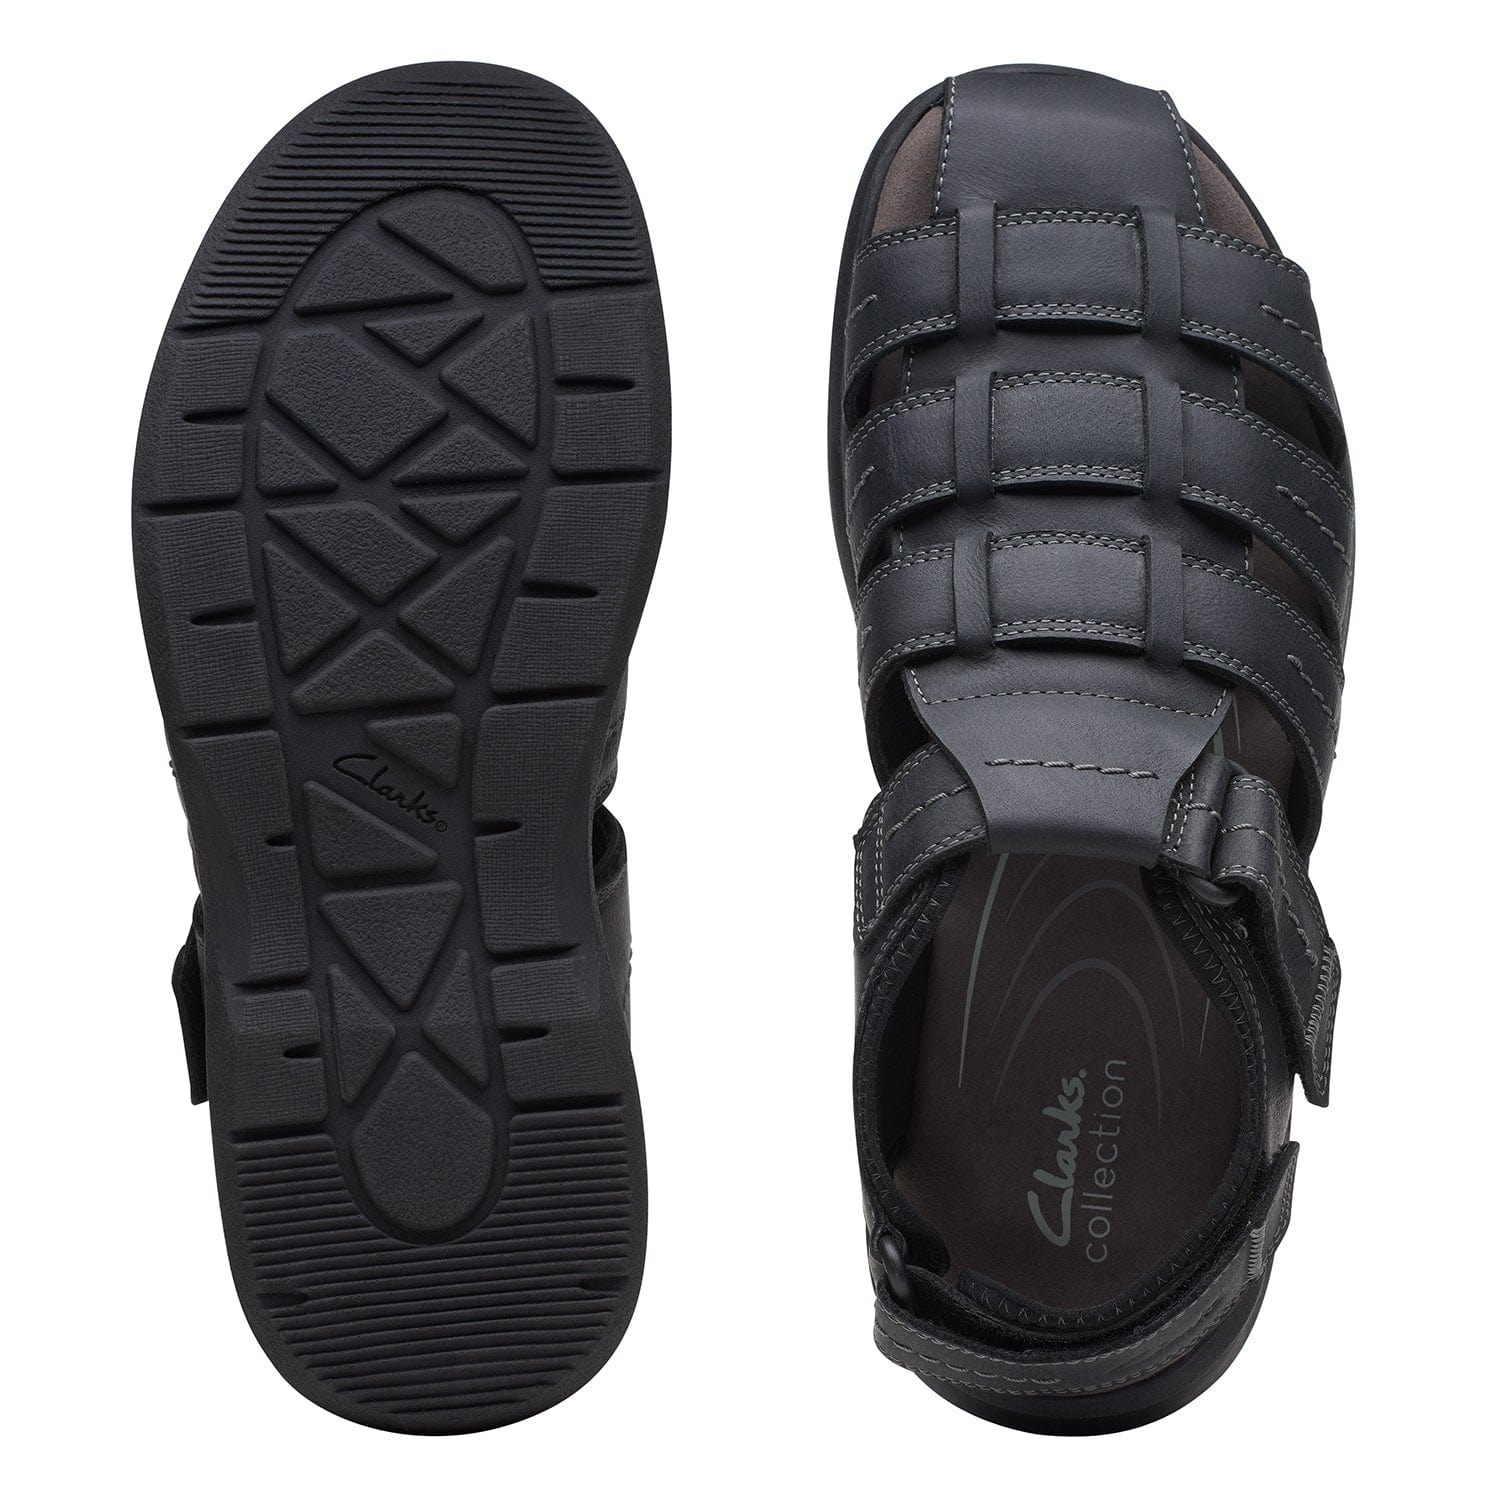 Clarks Walkford Fish - Sandals - Black Tumbled - 261717938 - H Width (Wide Fit)